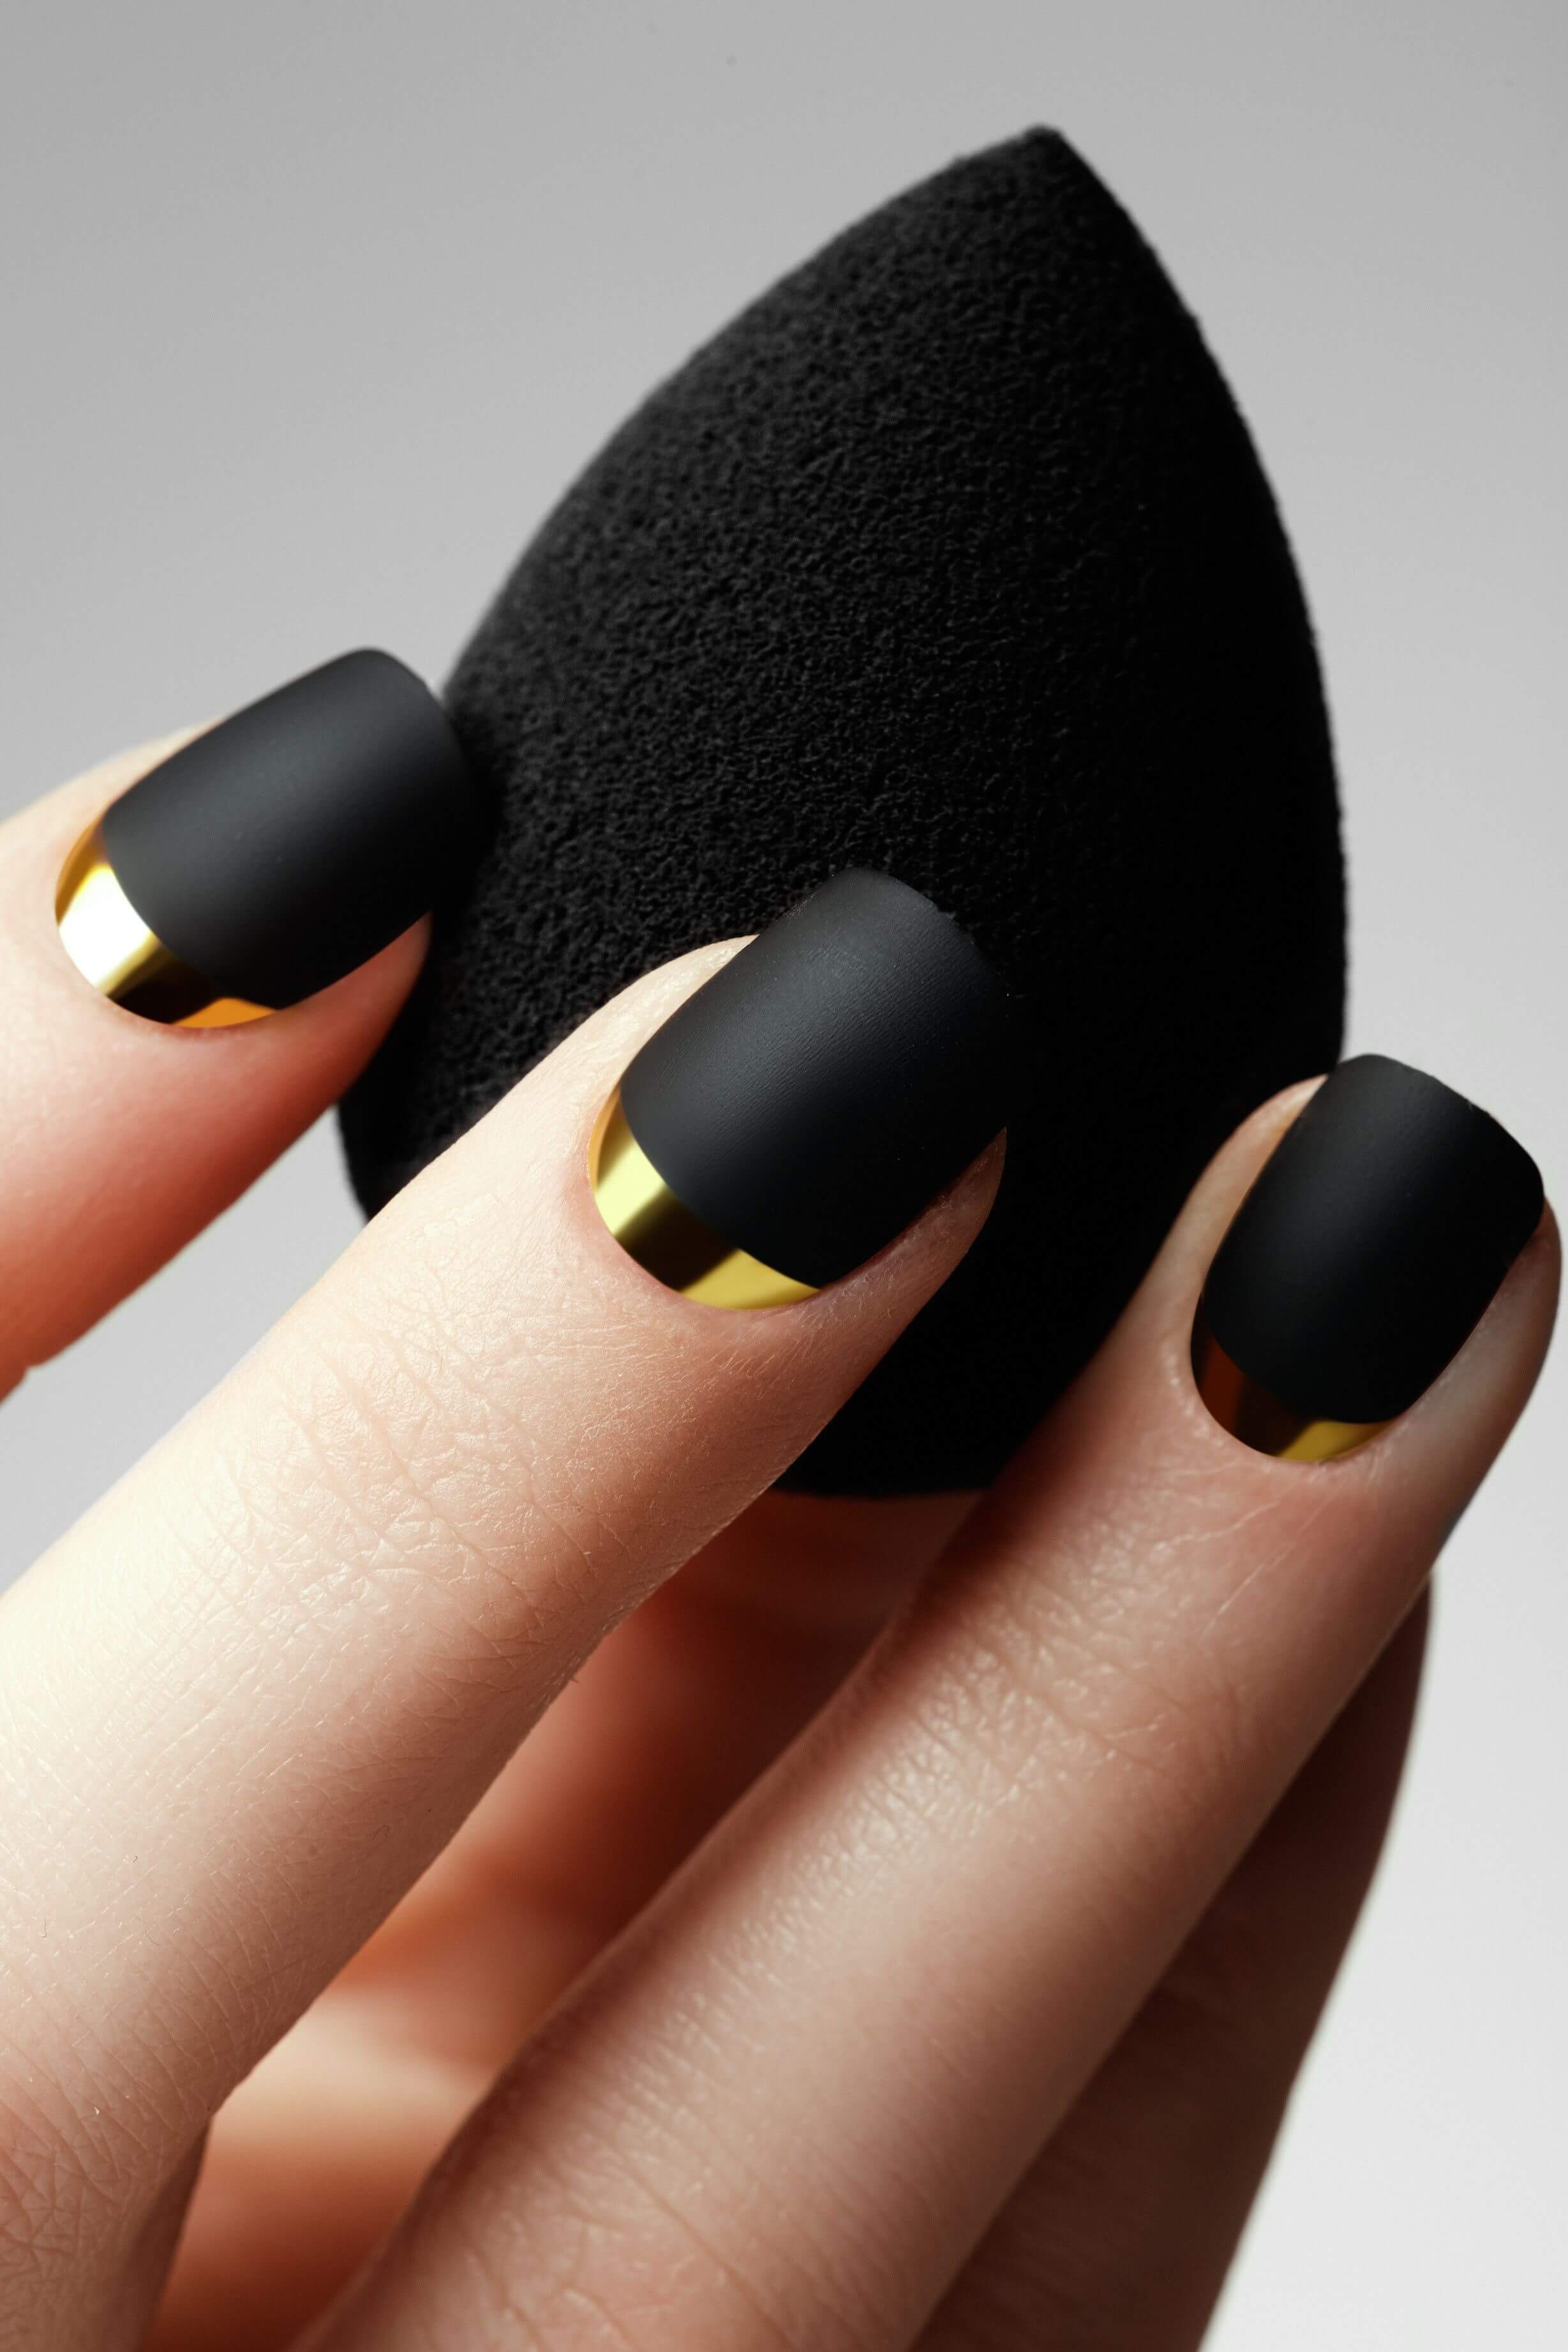 Stunning Black and Gold Manicure